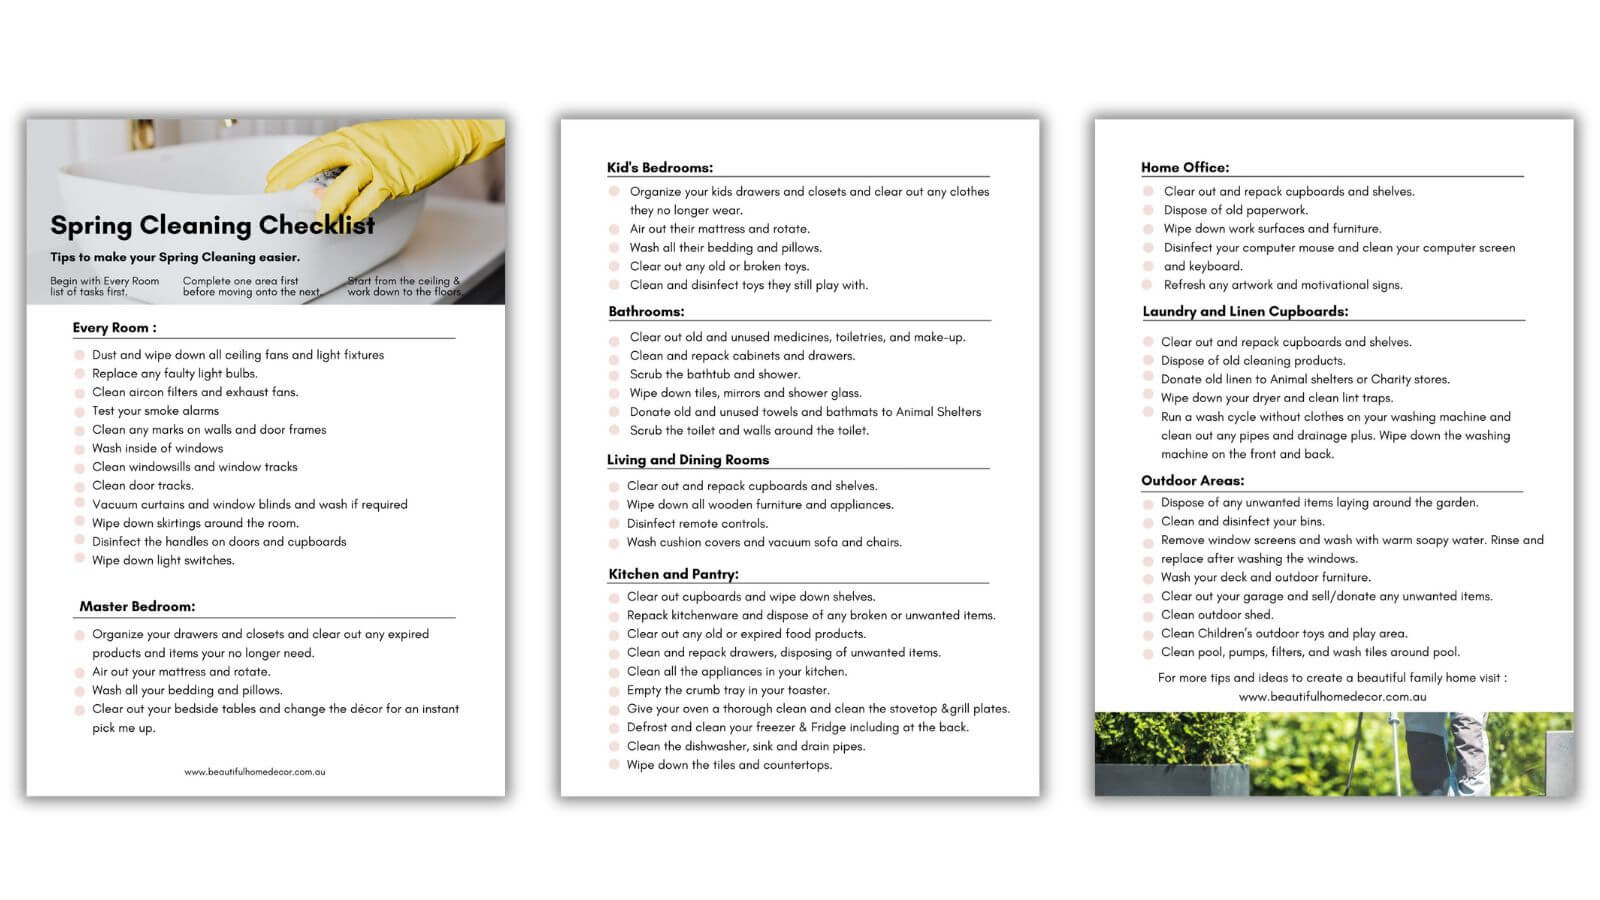 Free Checklist for Spring Cleaning your home